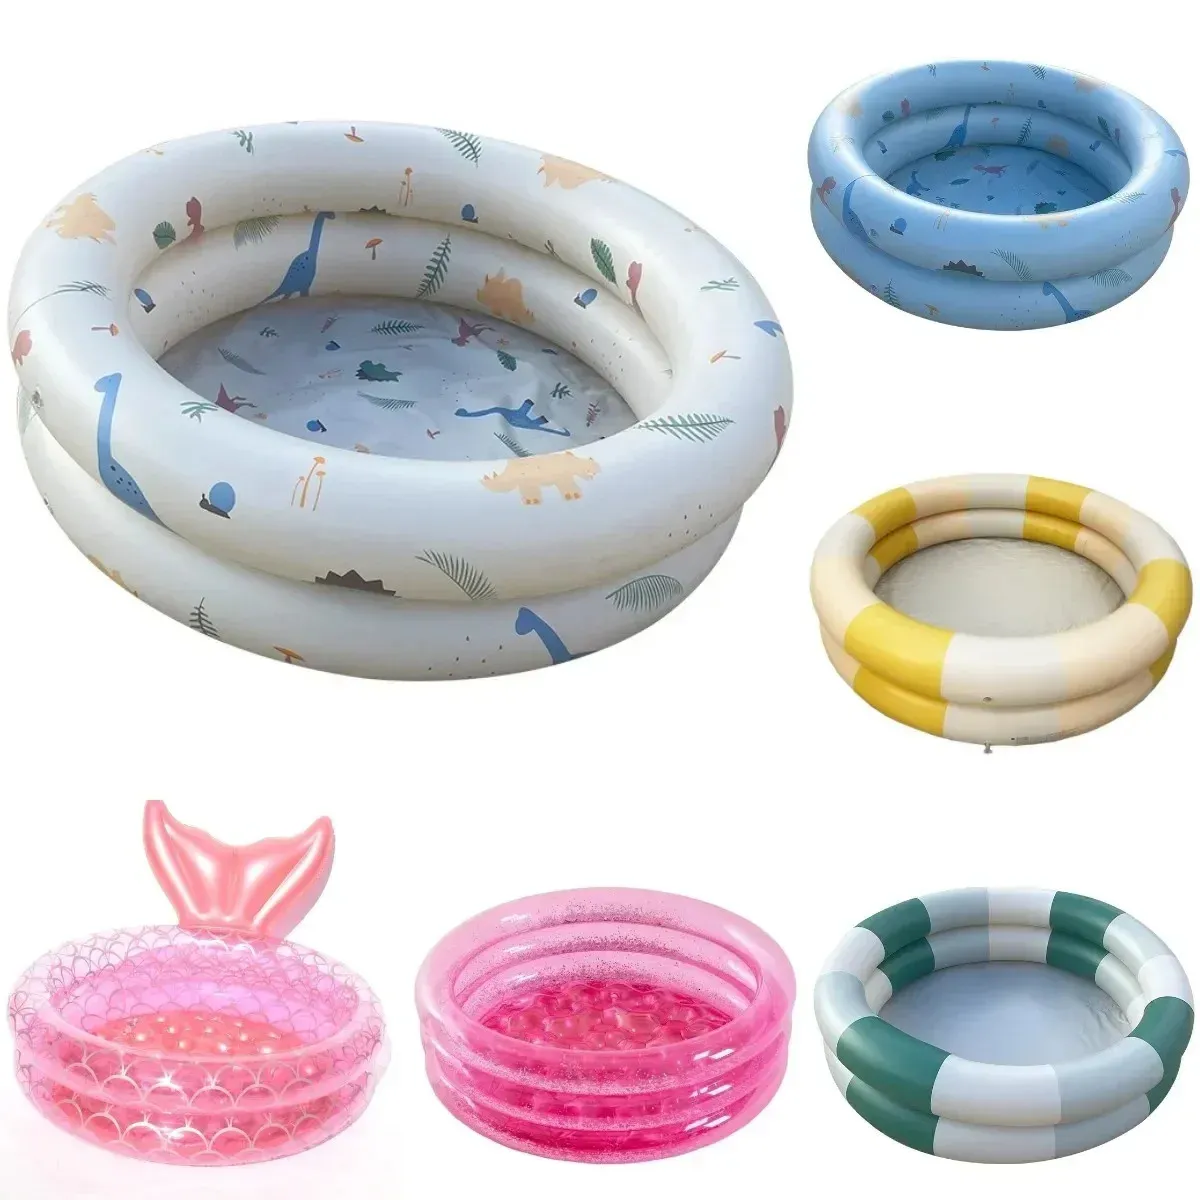 Inflatable Baby Swimming Pool For Babe Household Outdoor Mermaid Paddling Pool PVC Round Fence Play Space Room Bath Pool Gifts 240423